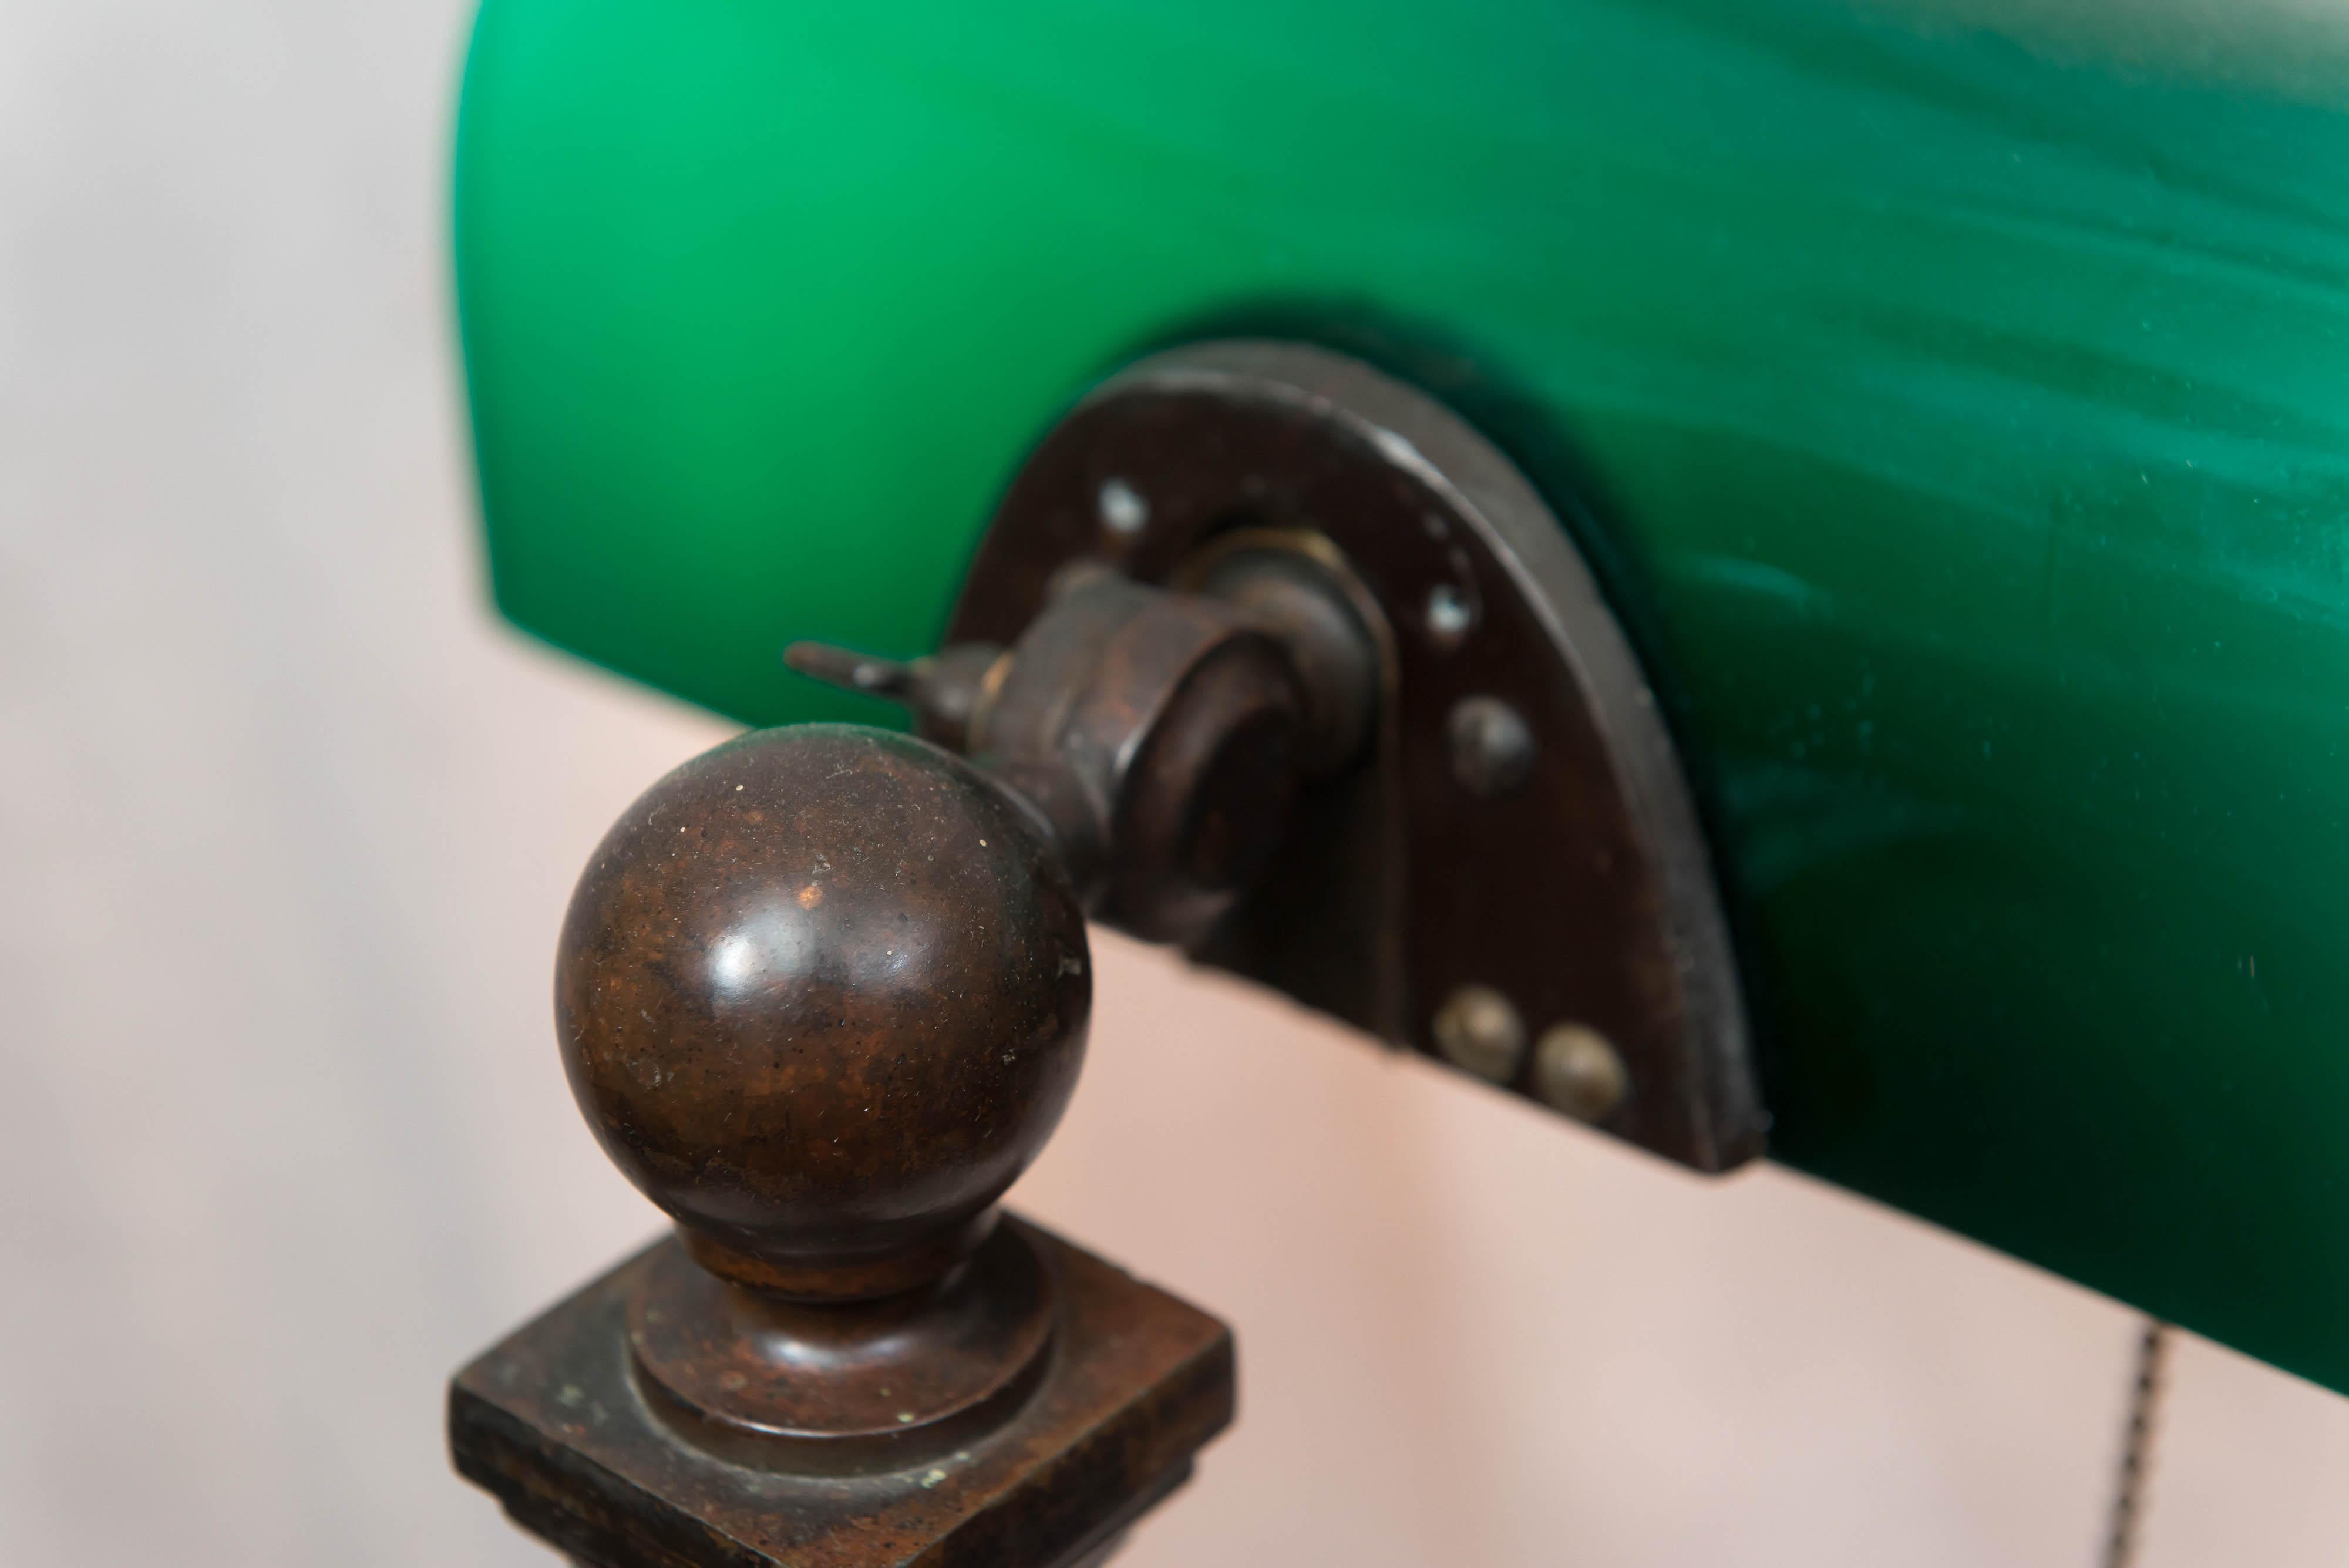 Hand-Crafted Green Shaded Banker's Lamp, Signed Verdelite, circa 1917